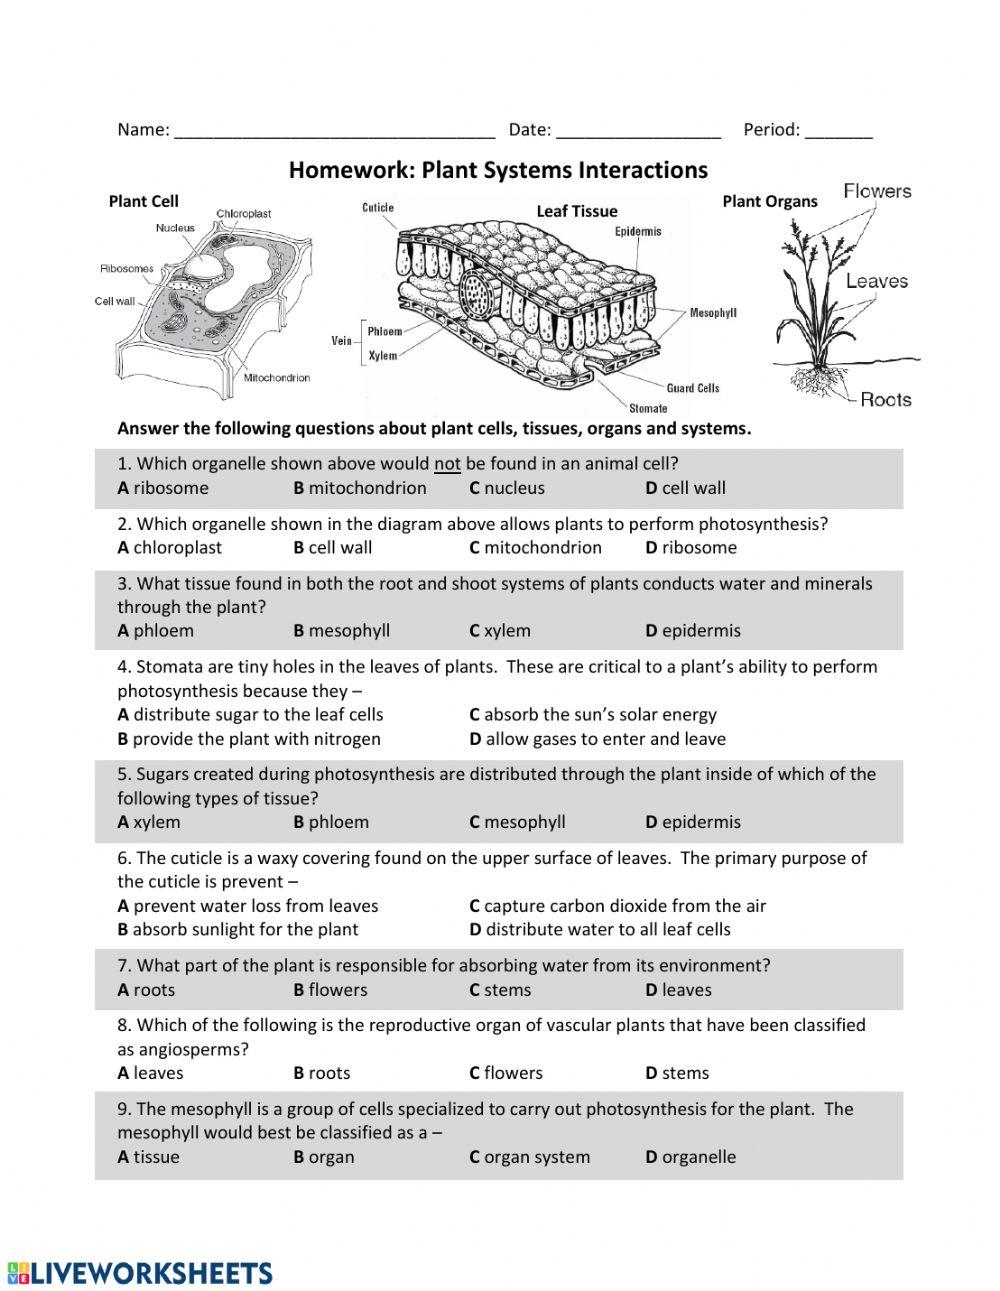 Plant Systems Interactions